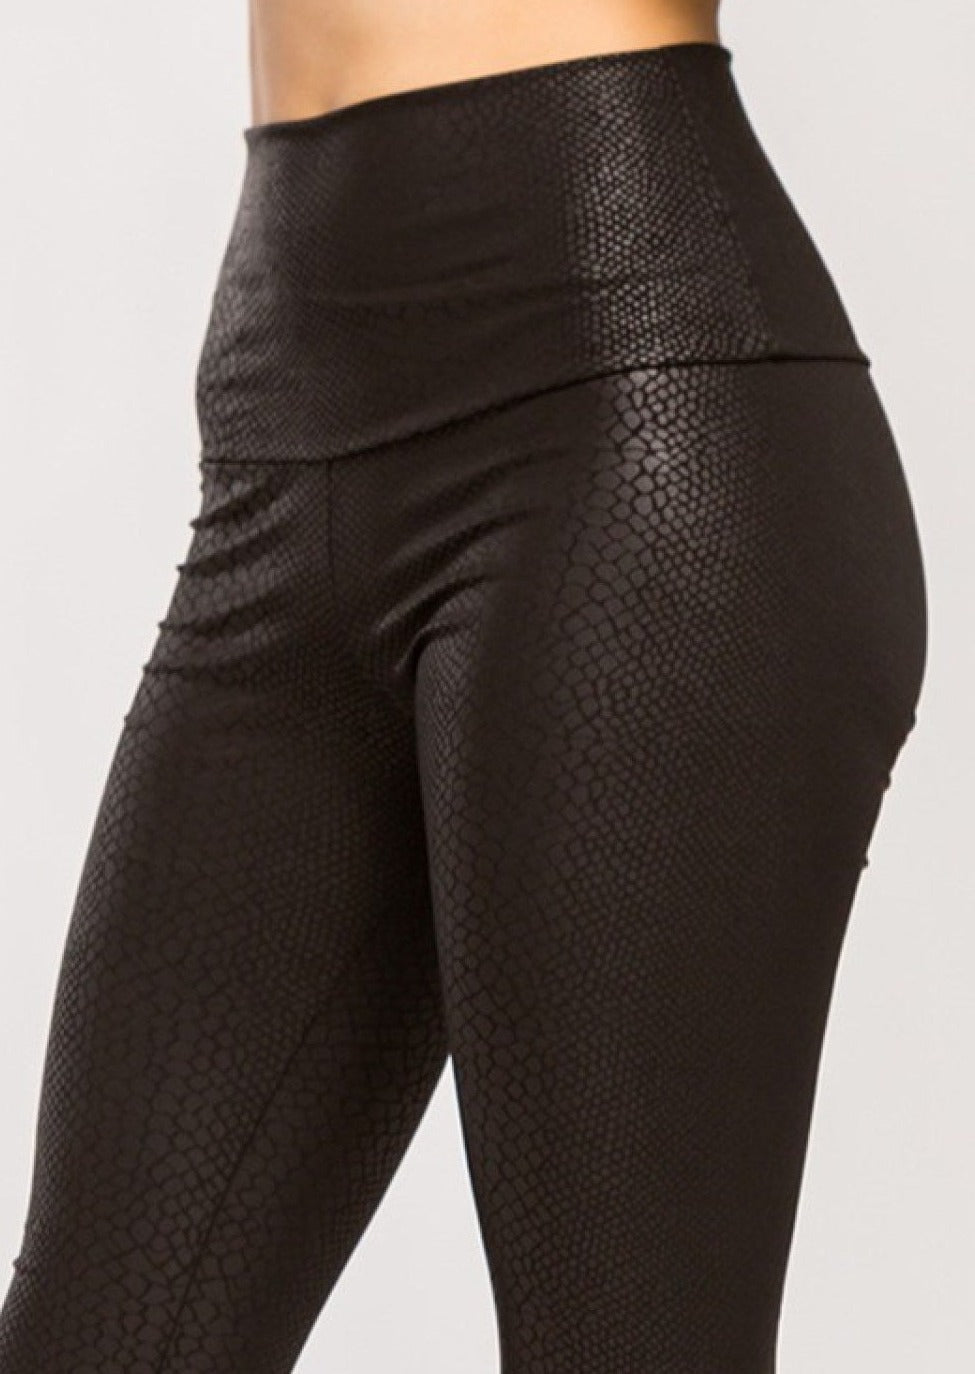 Made in USA | Snake Skin Embossed PU Vegan Faux Leather Black Leggings | Brand: Cherish | Proudly Made in the USA | Classy Cozy Cool Women's Clothing Boutique